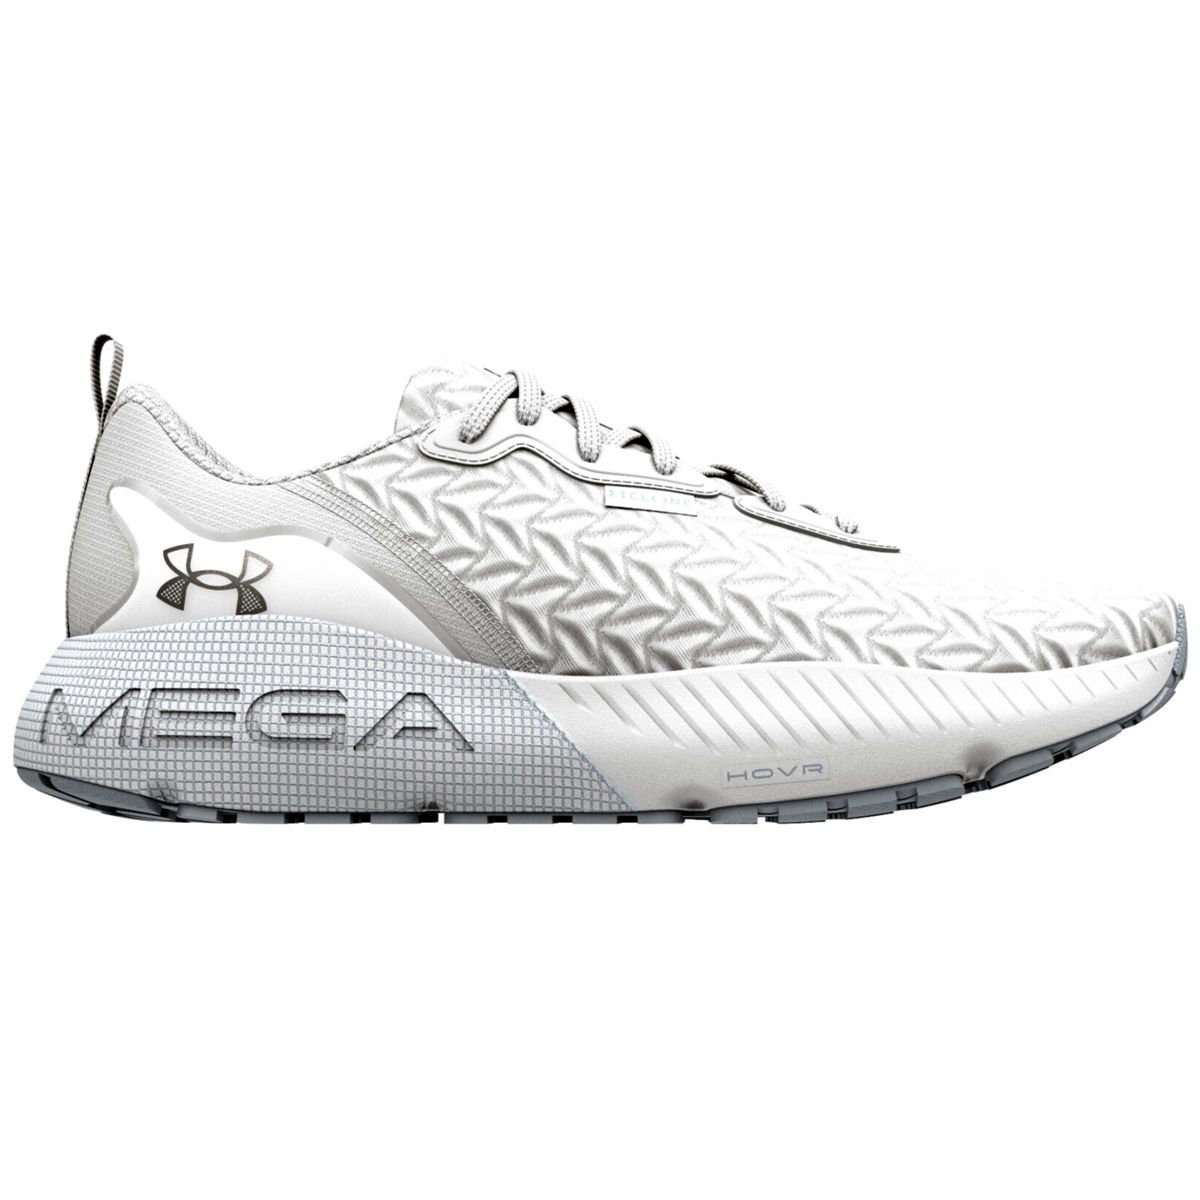 Under Armour HOVR Mega 3 Clone Men's Running Shoes 3025308-1